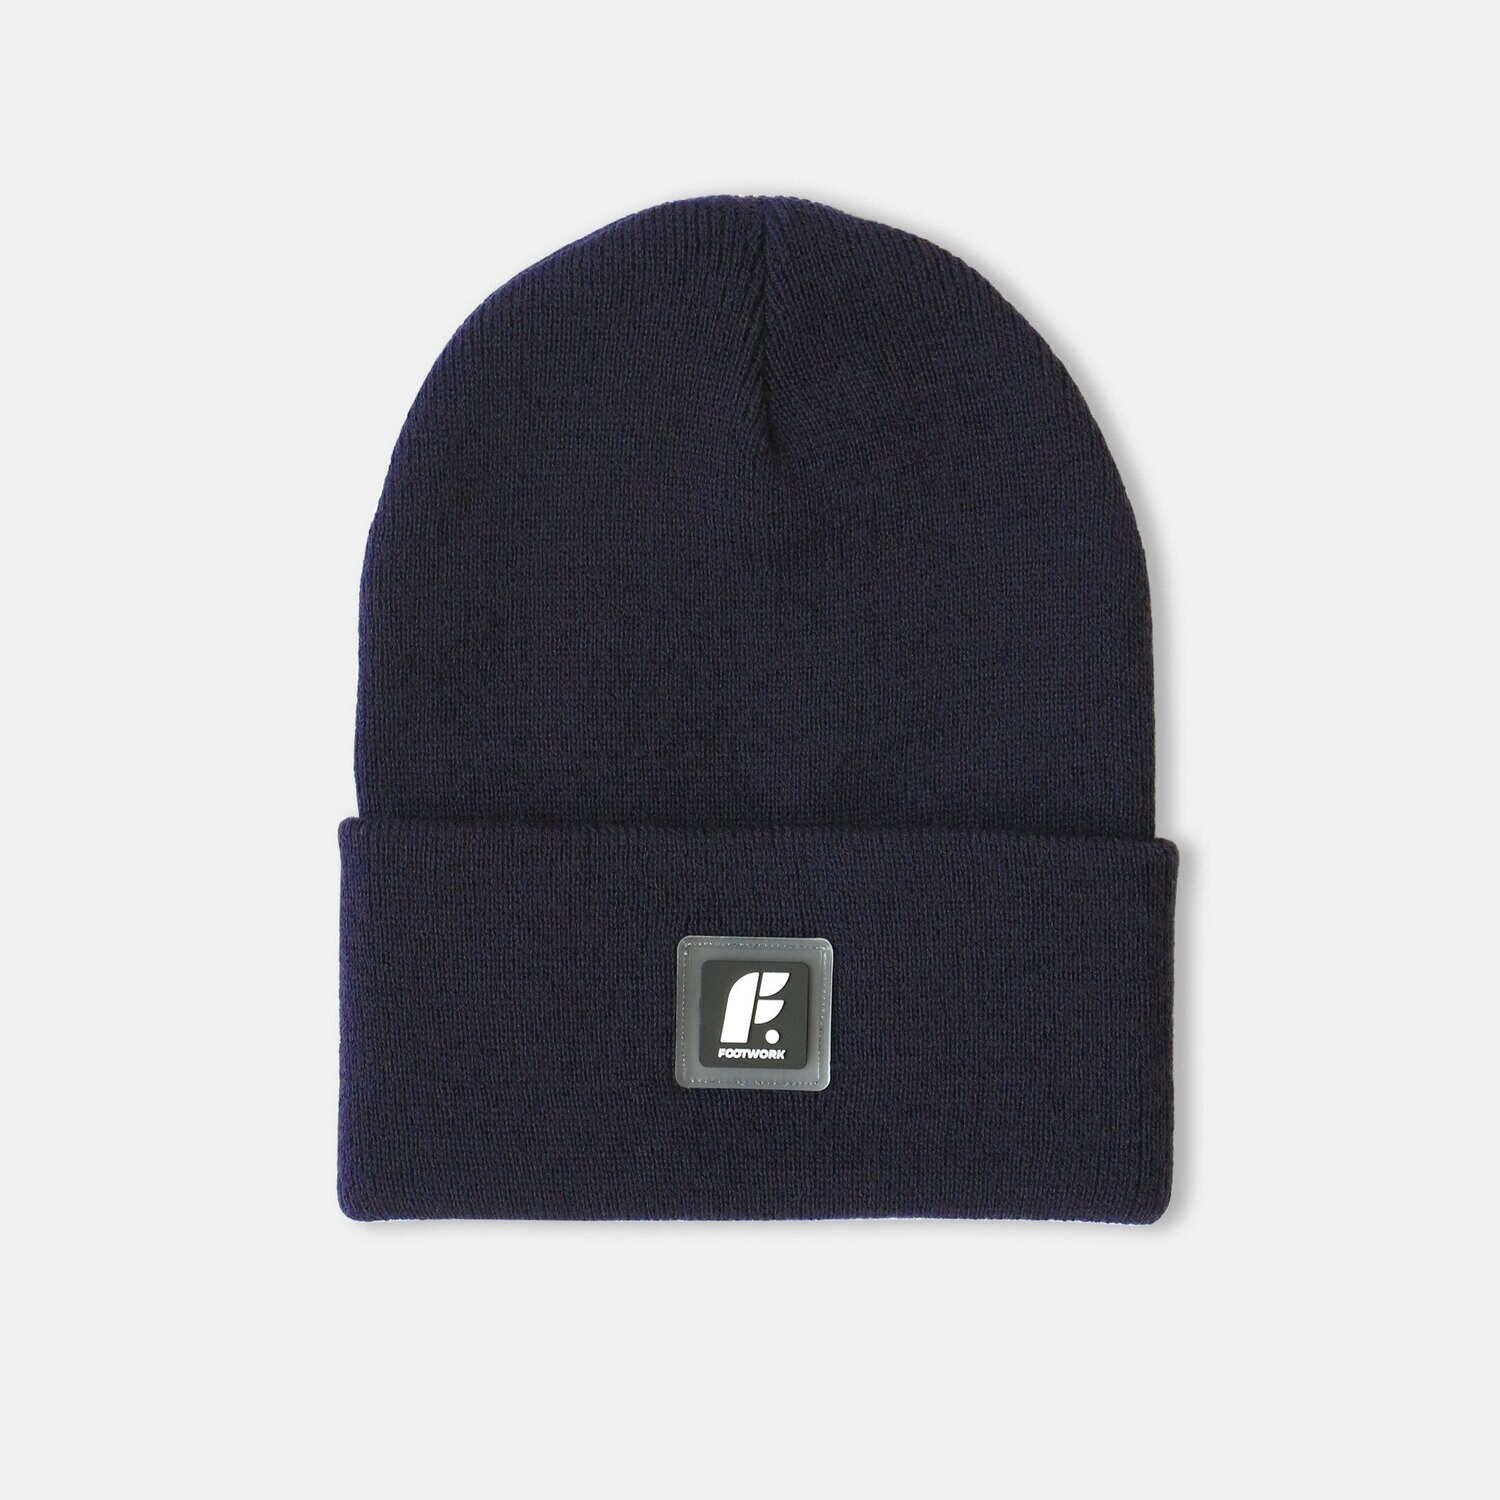 Шапка Footwork Fold Rubber Navy